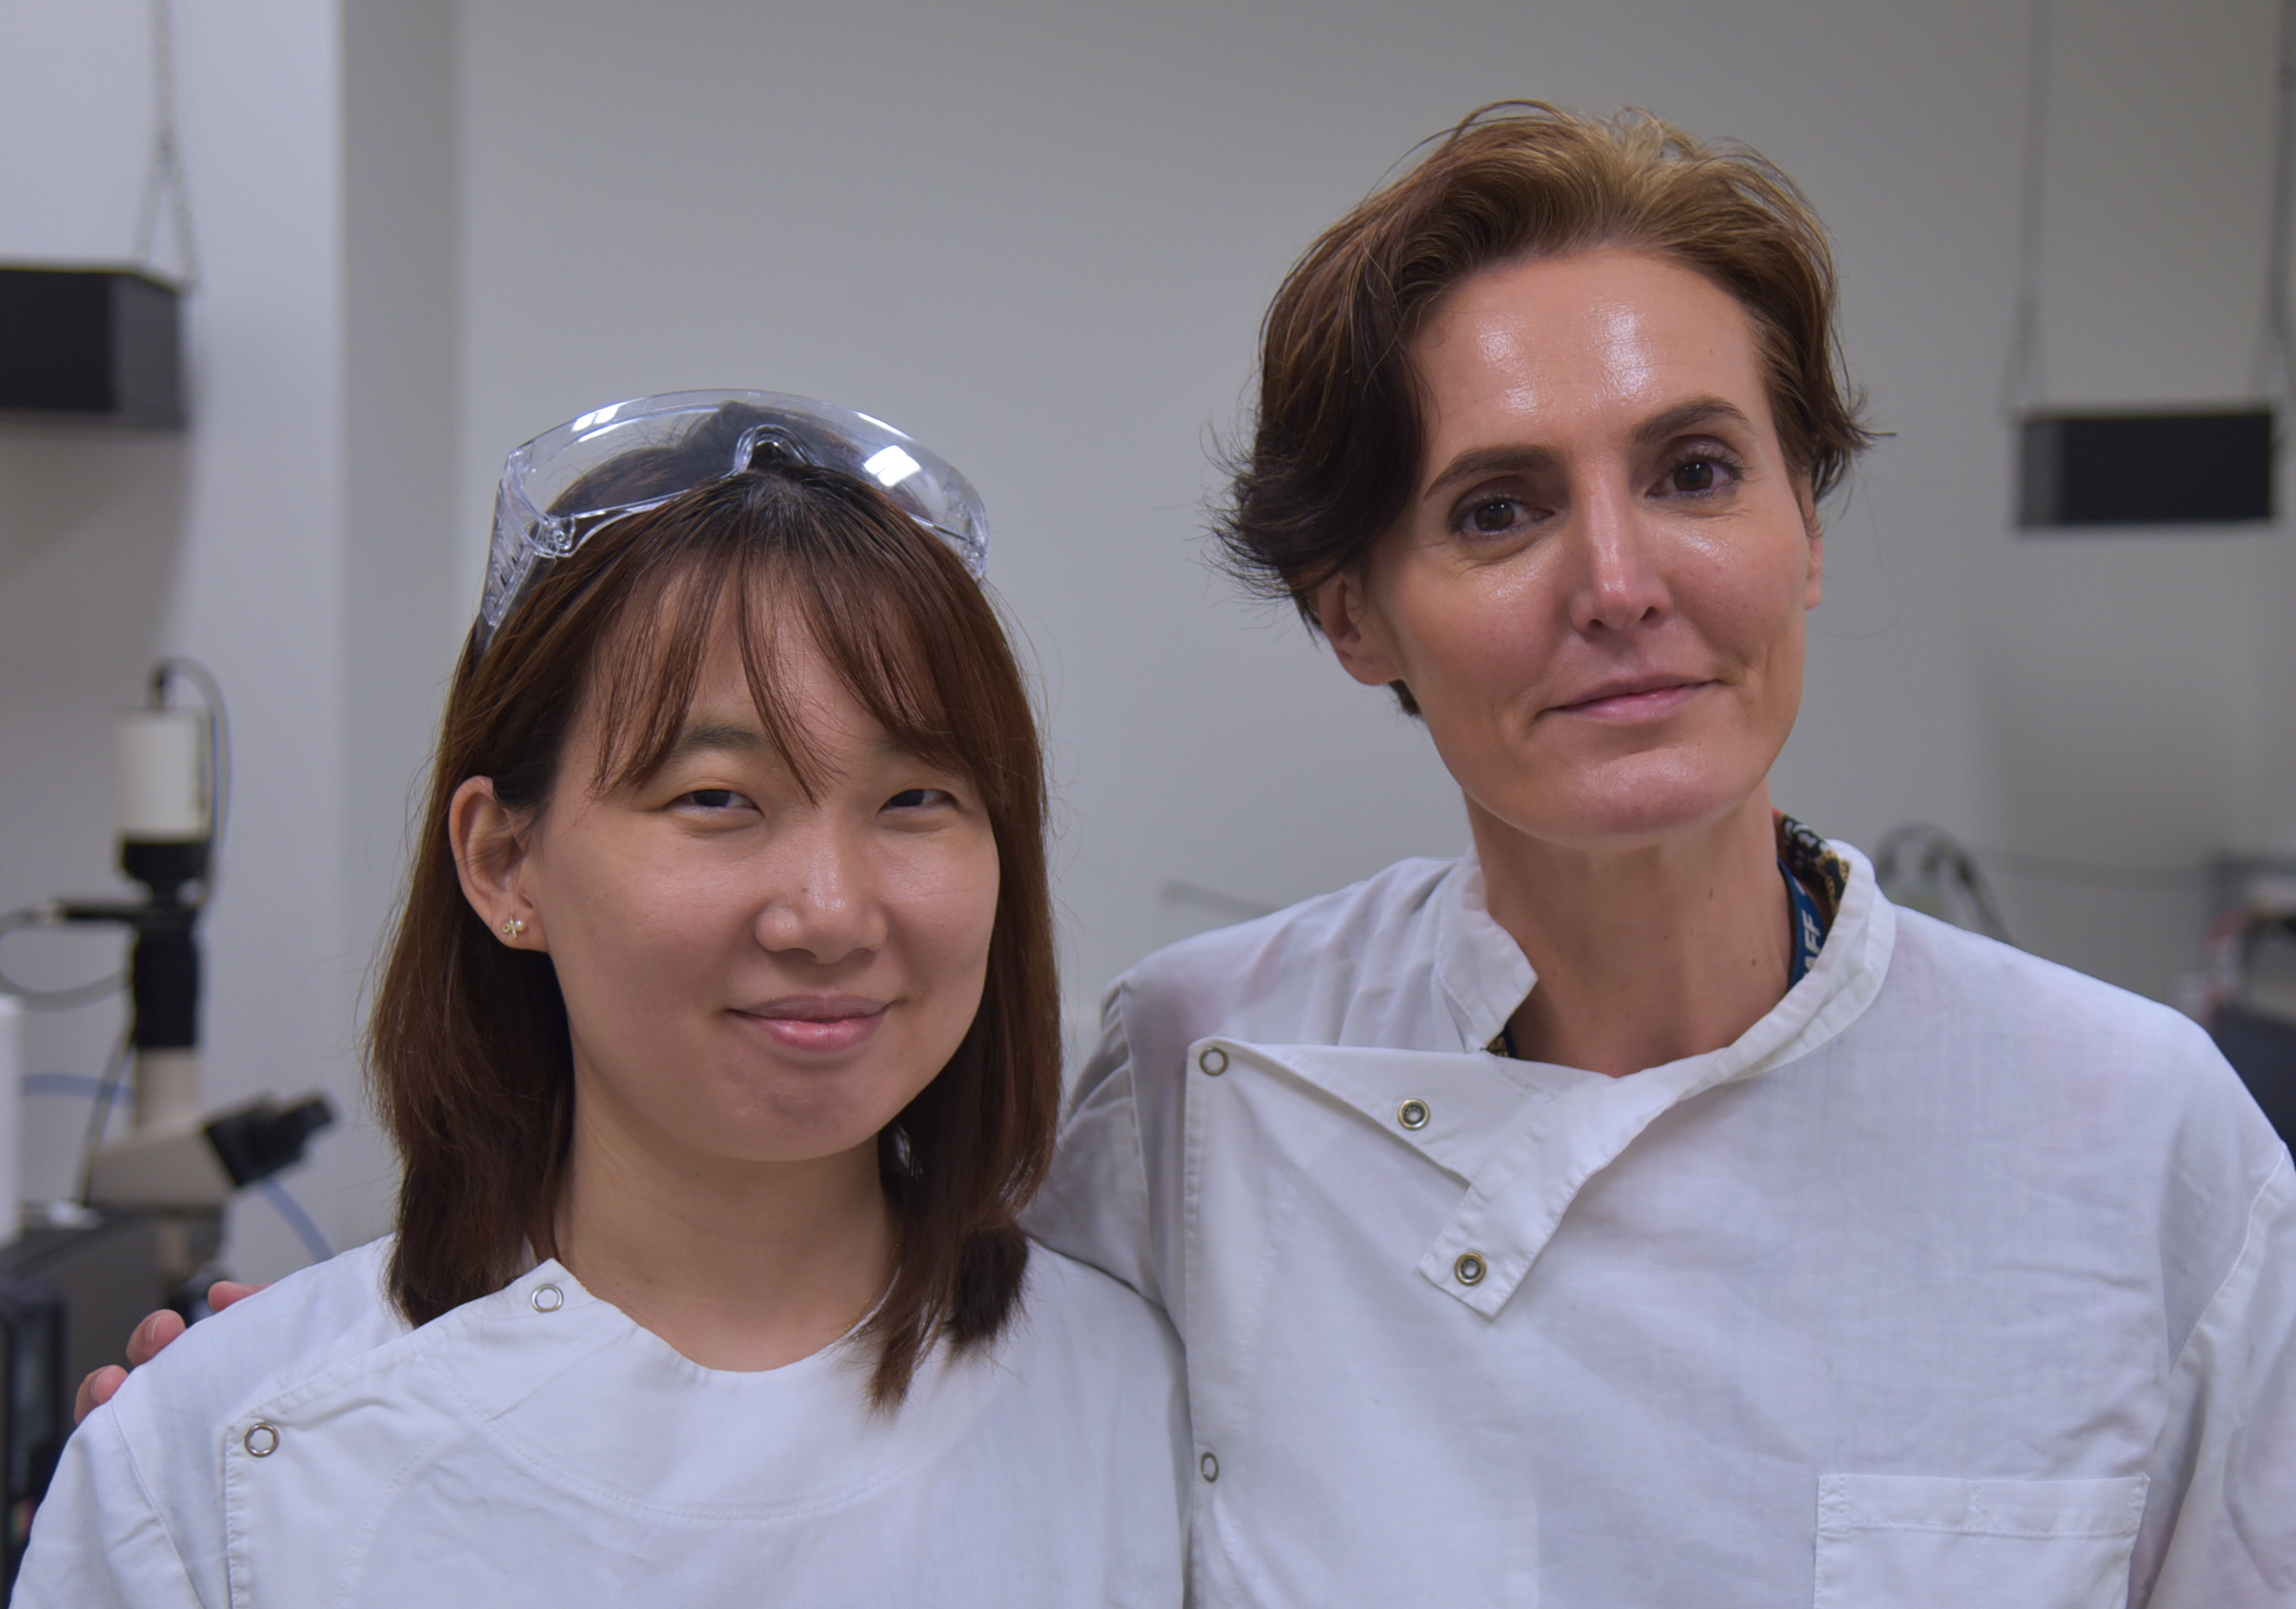 AIBN researchers Dr Ruirui Qiao and Dr Helen Forgham believe they have ideal vehicle to simultaneously treat, map and monitor the notoriously difficult Medulloblastoma tumour that occurs in children.